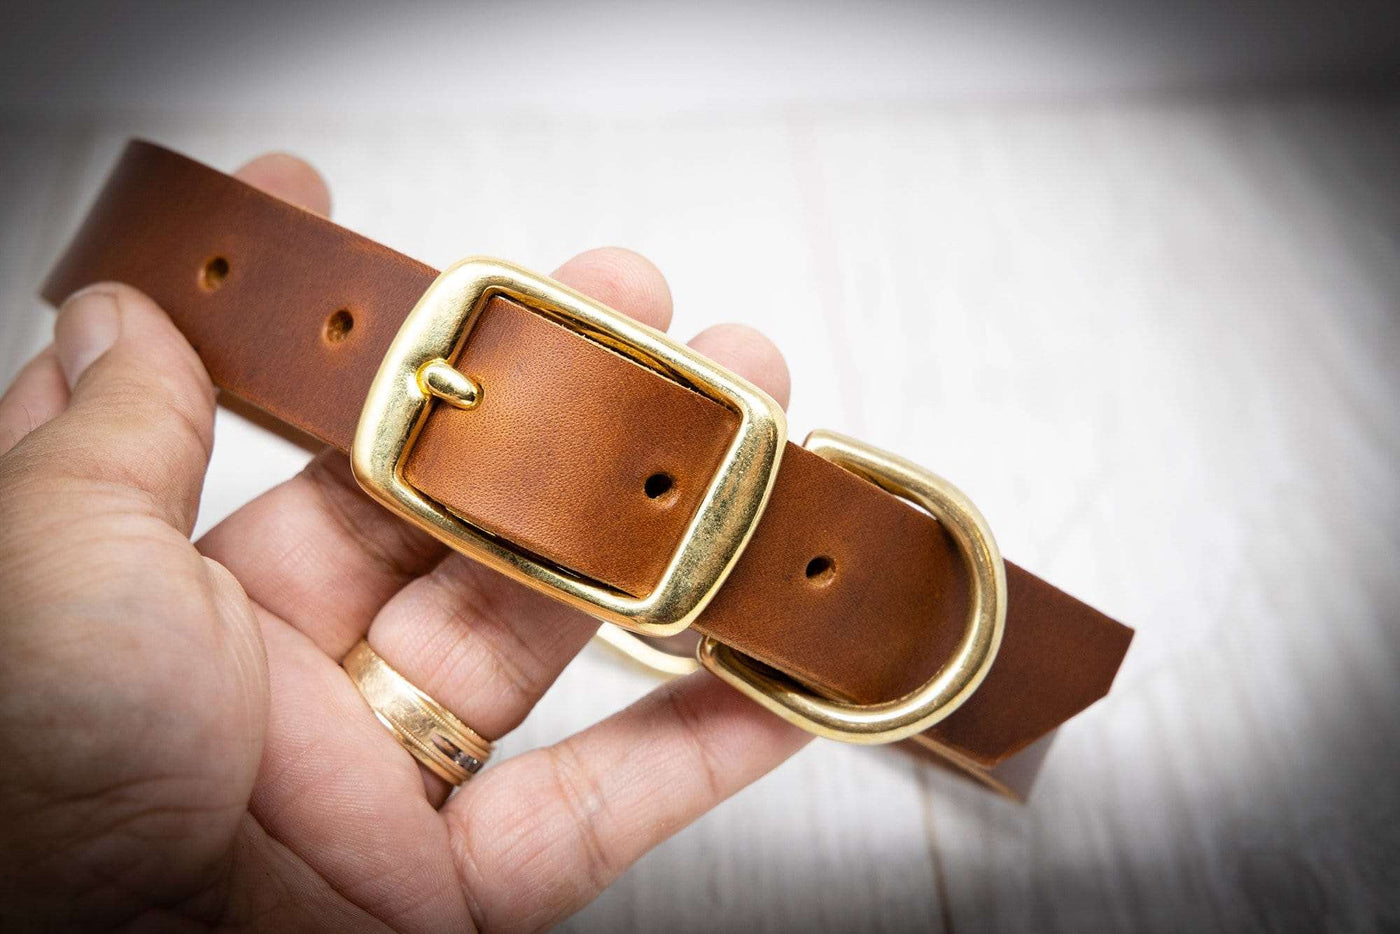 Leather Dog Collars - Personalized Leather Dog Collar